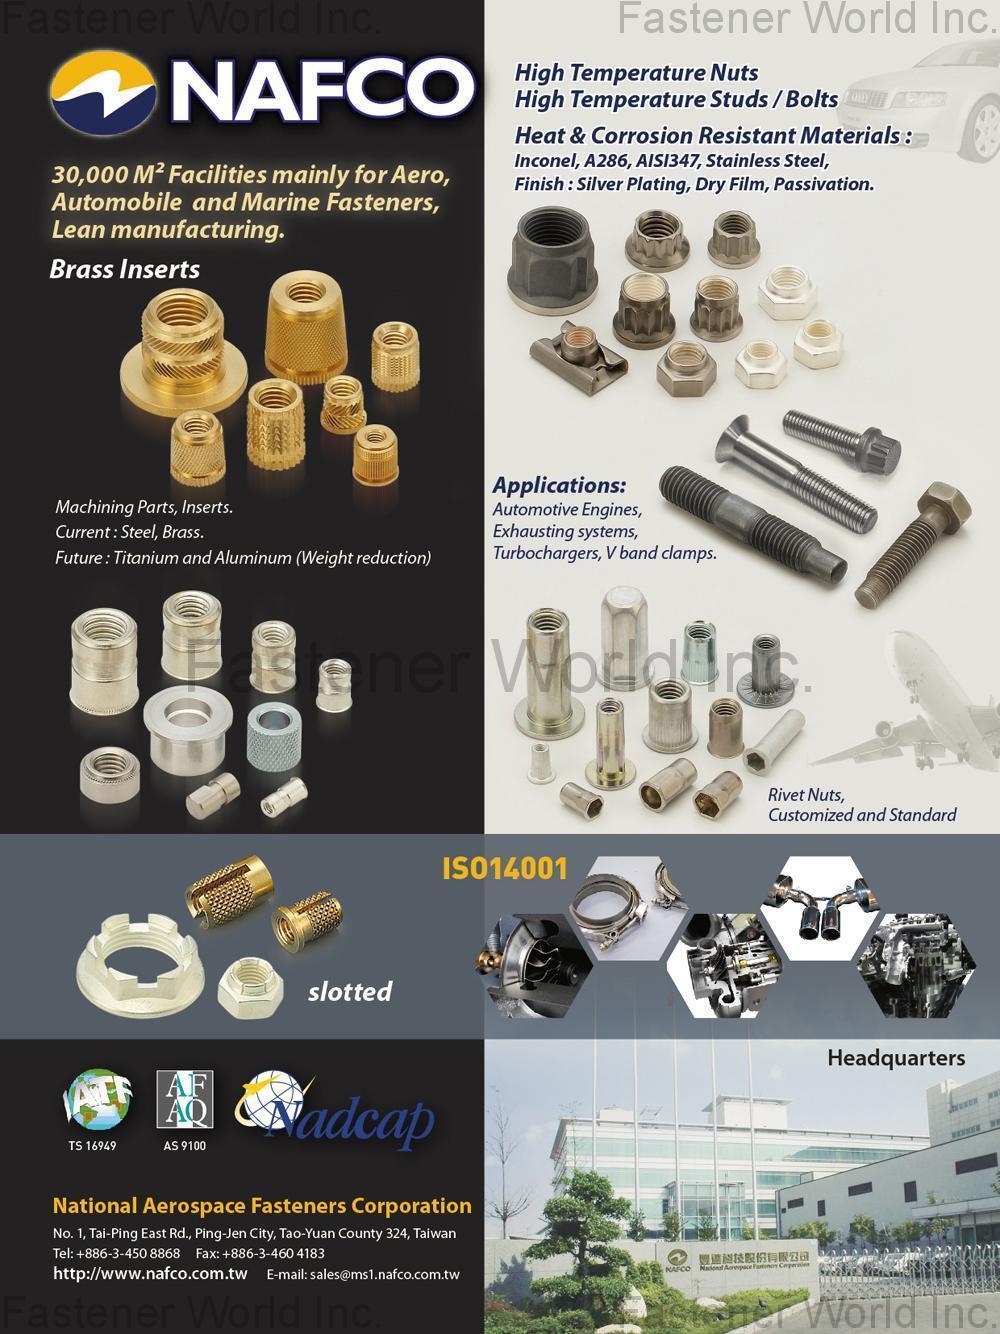 NATIONAL AEROSPACE FASTENERS CORPORATION (NAFCO) , High Temperature Nuts / High Temperature Studs / High Temperature Bolts, Slotted, Rivet Nuts , Automotive Parts